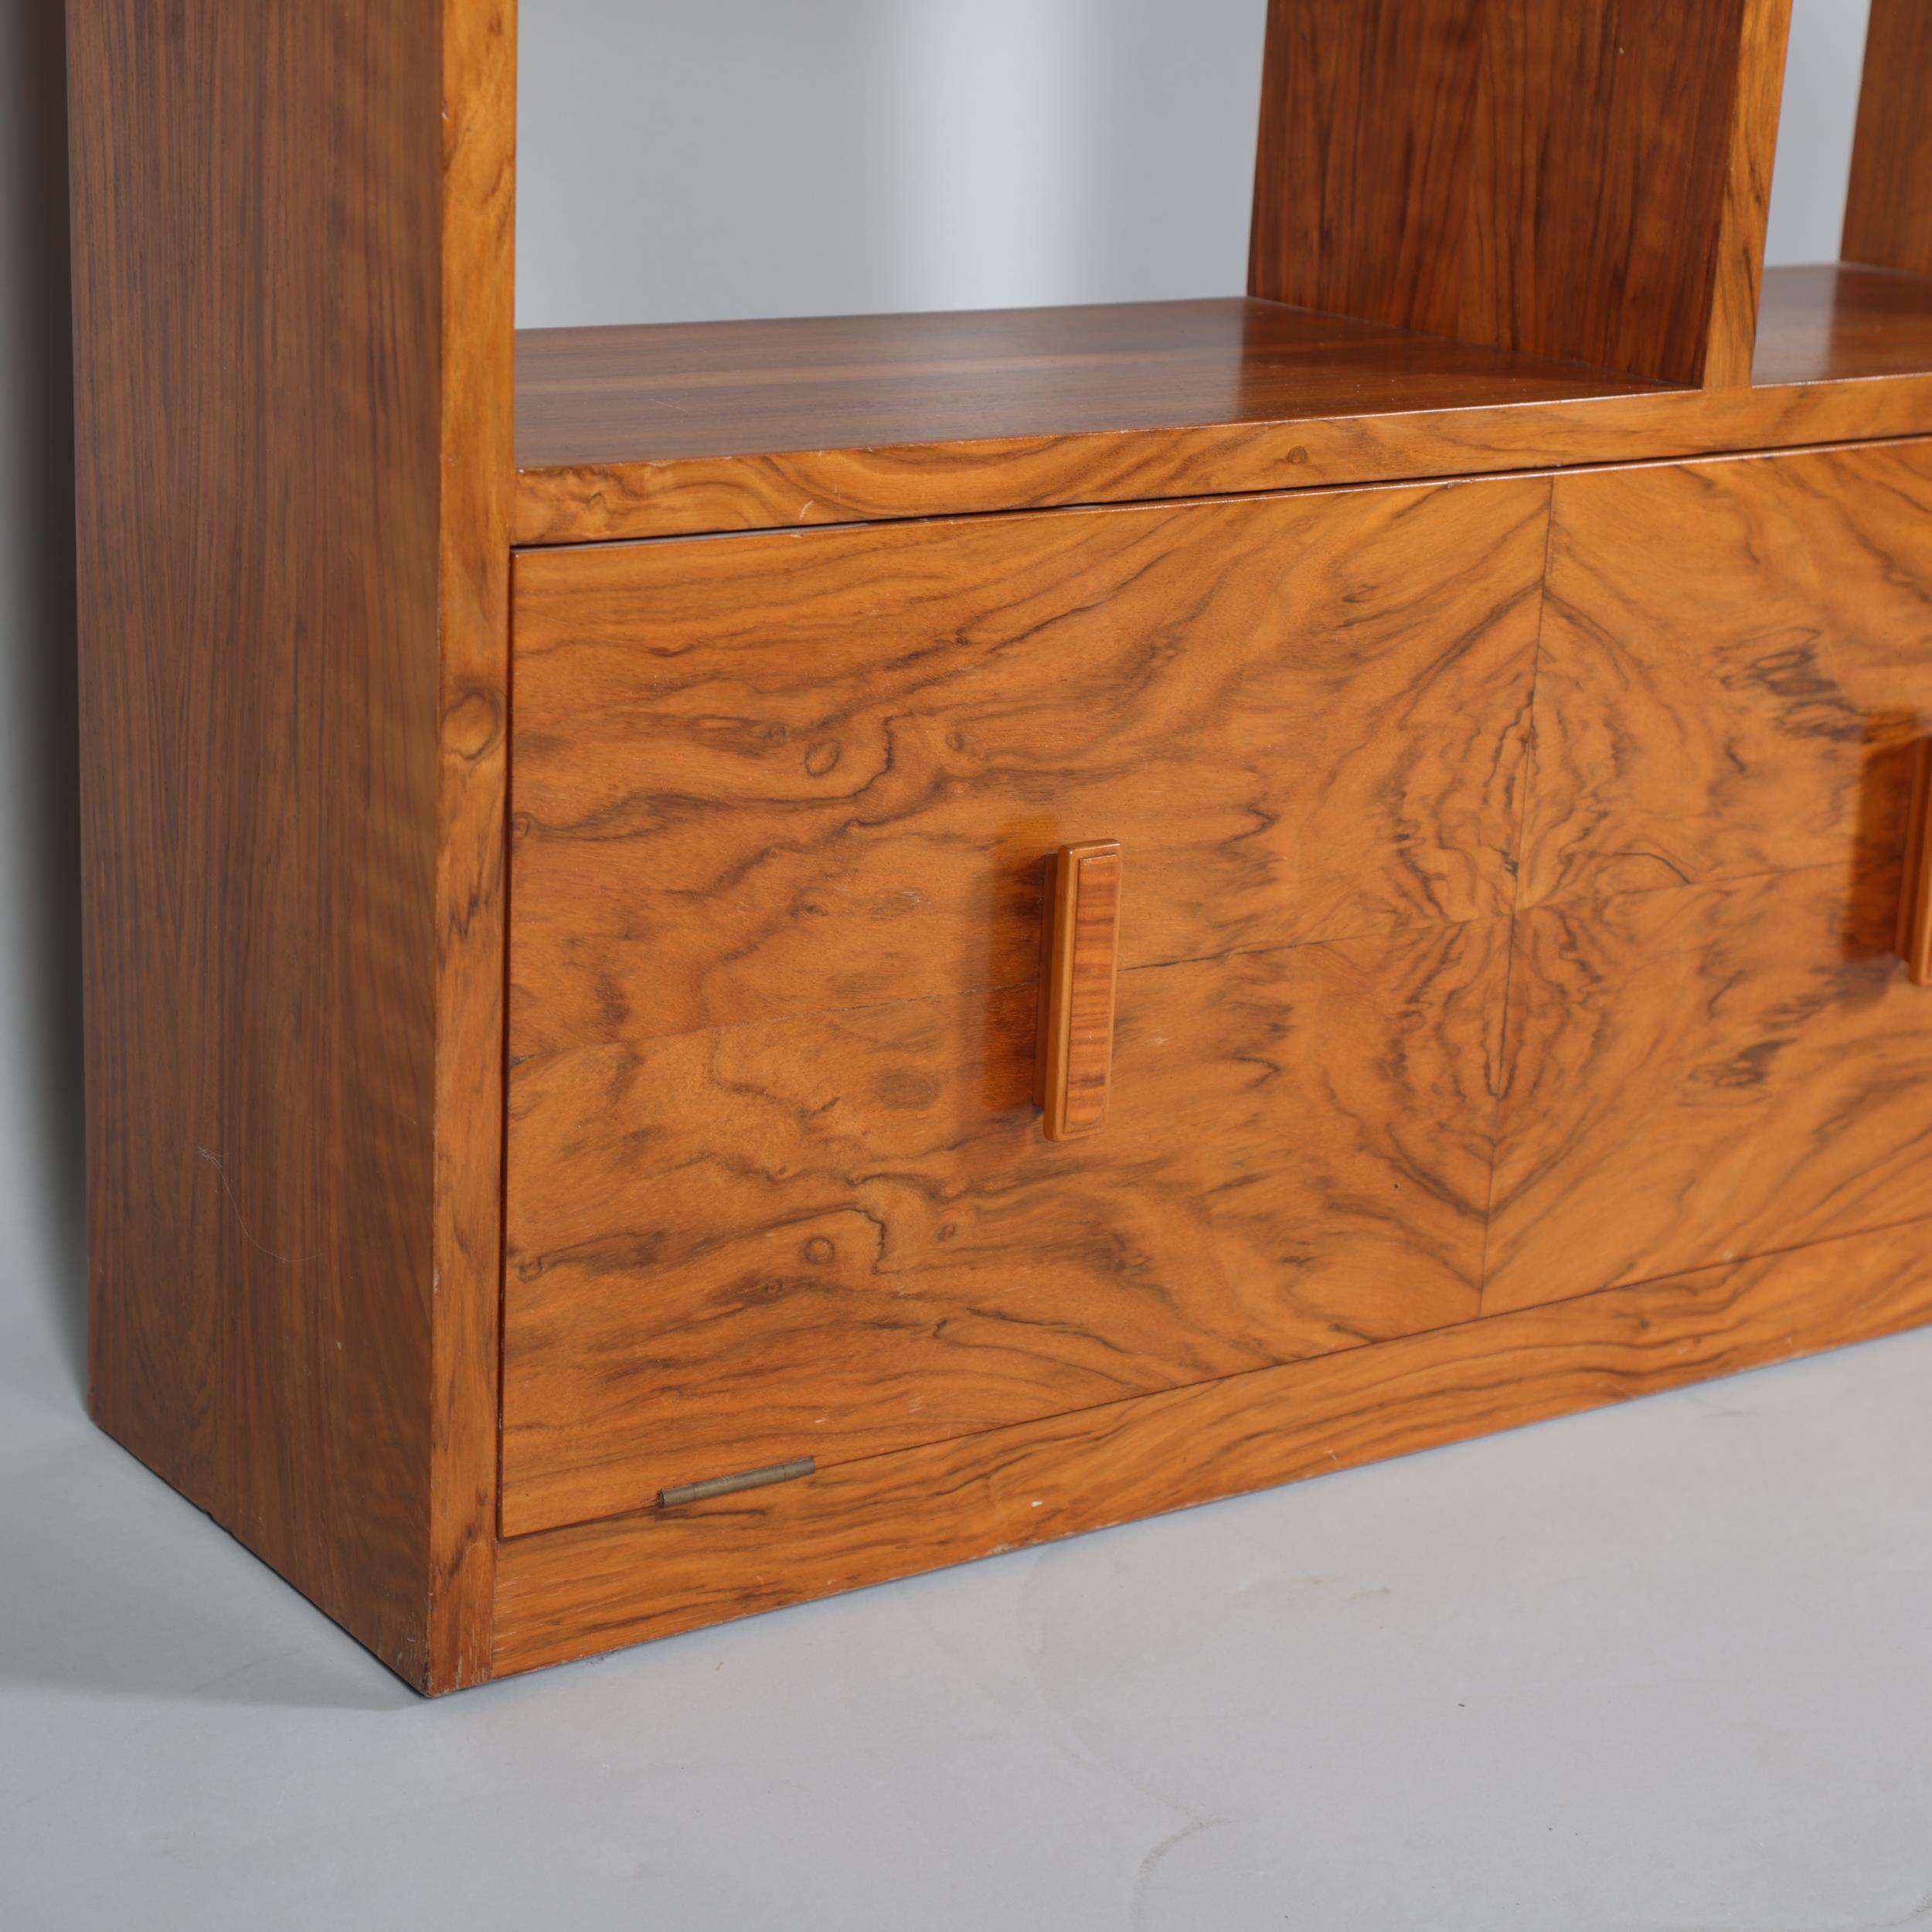 Art Deco walnut stepped open bookcase with drop-front cupboard below, width 77cm, height 107cm - Image 2 of 4